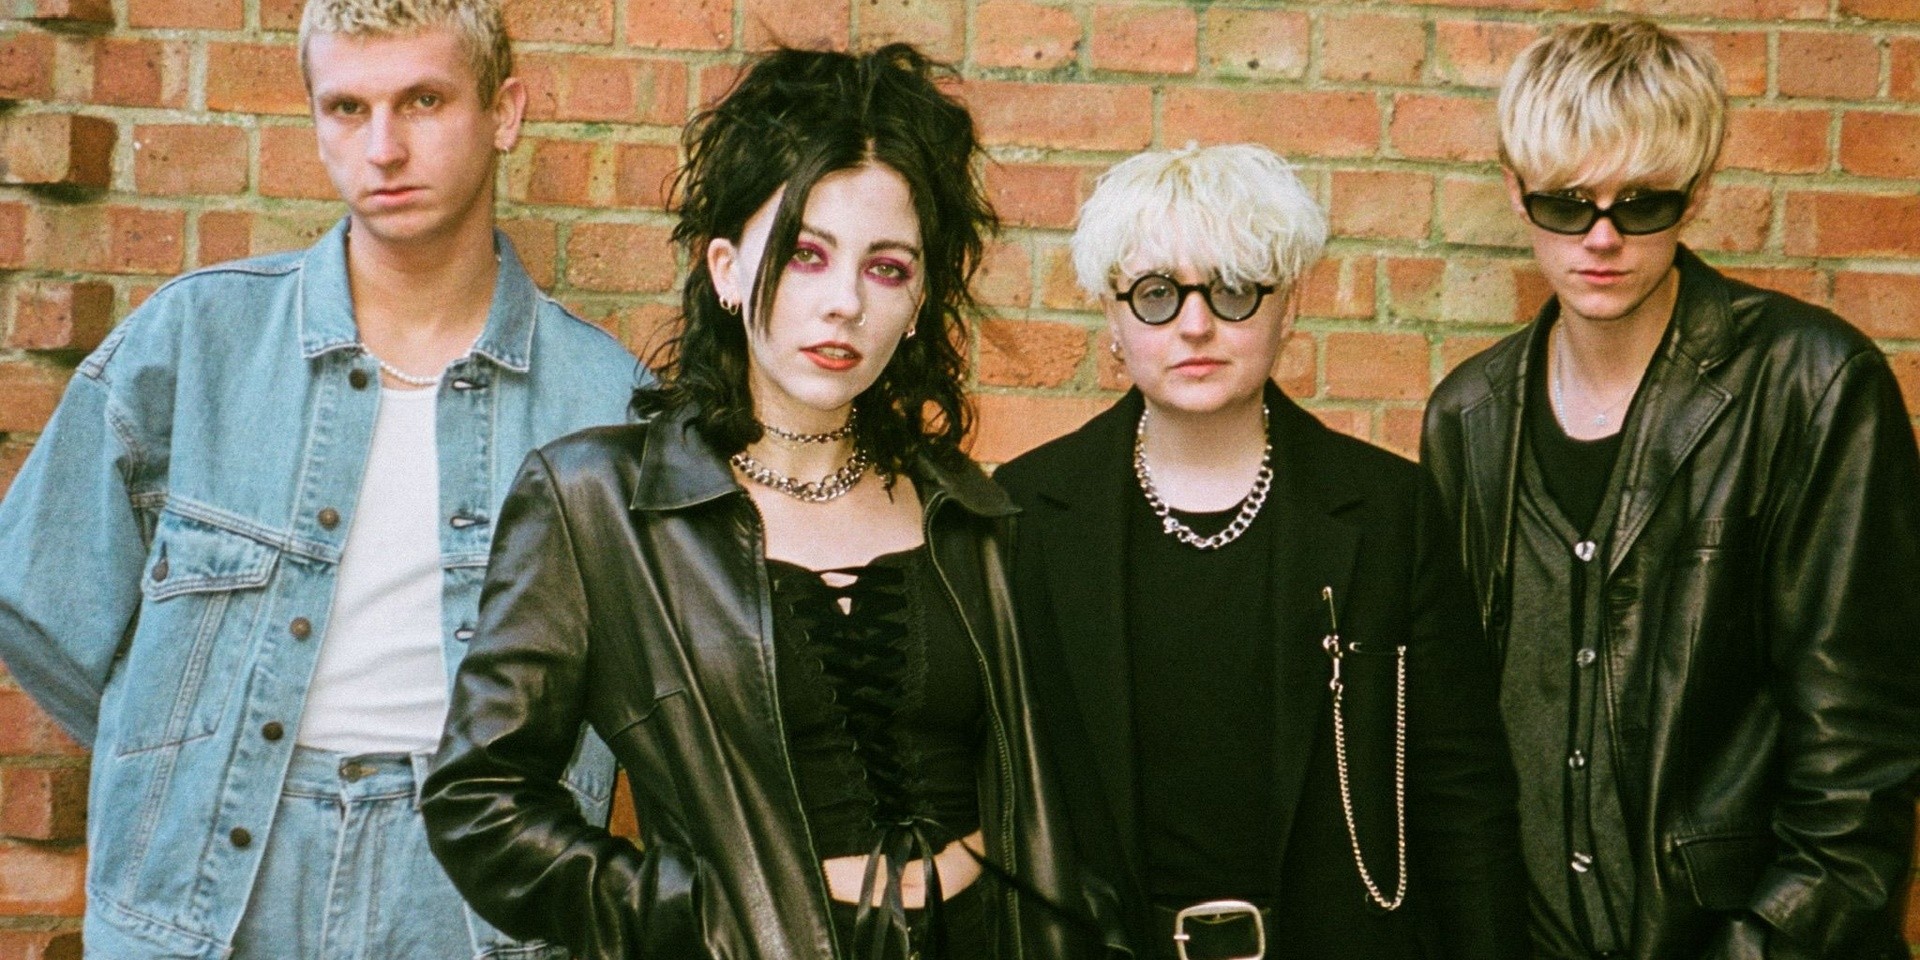 Pale Waves’ upcoming album Who Am I? is Heather Baron-Gracie’s “self-confessed journey towards wanting to become a better person”